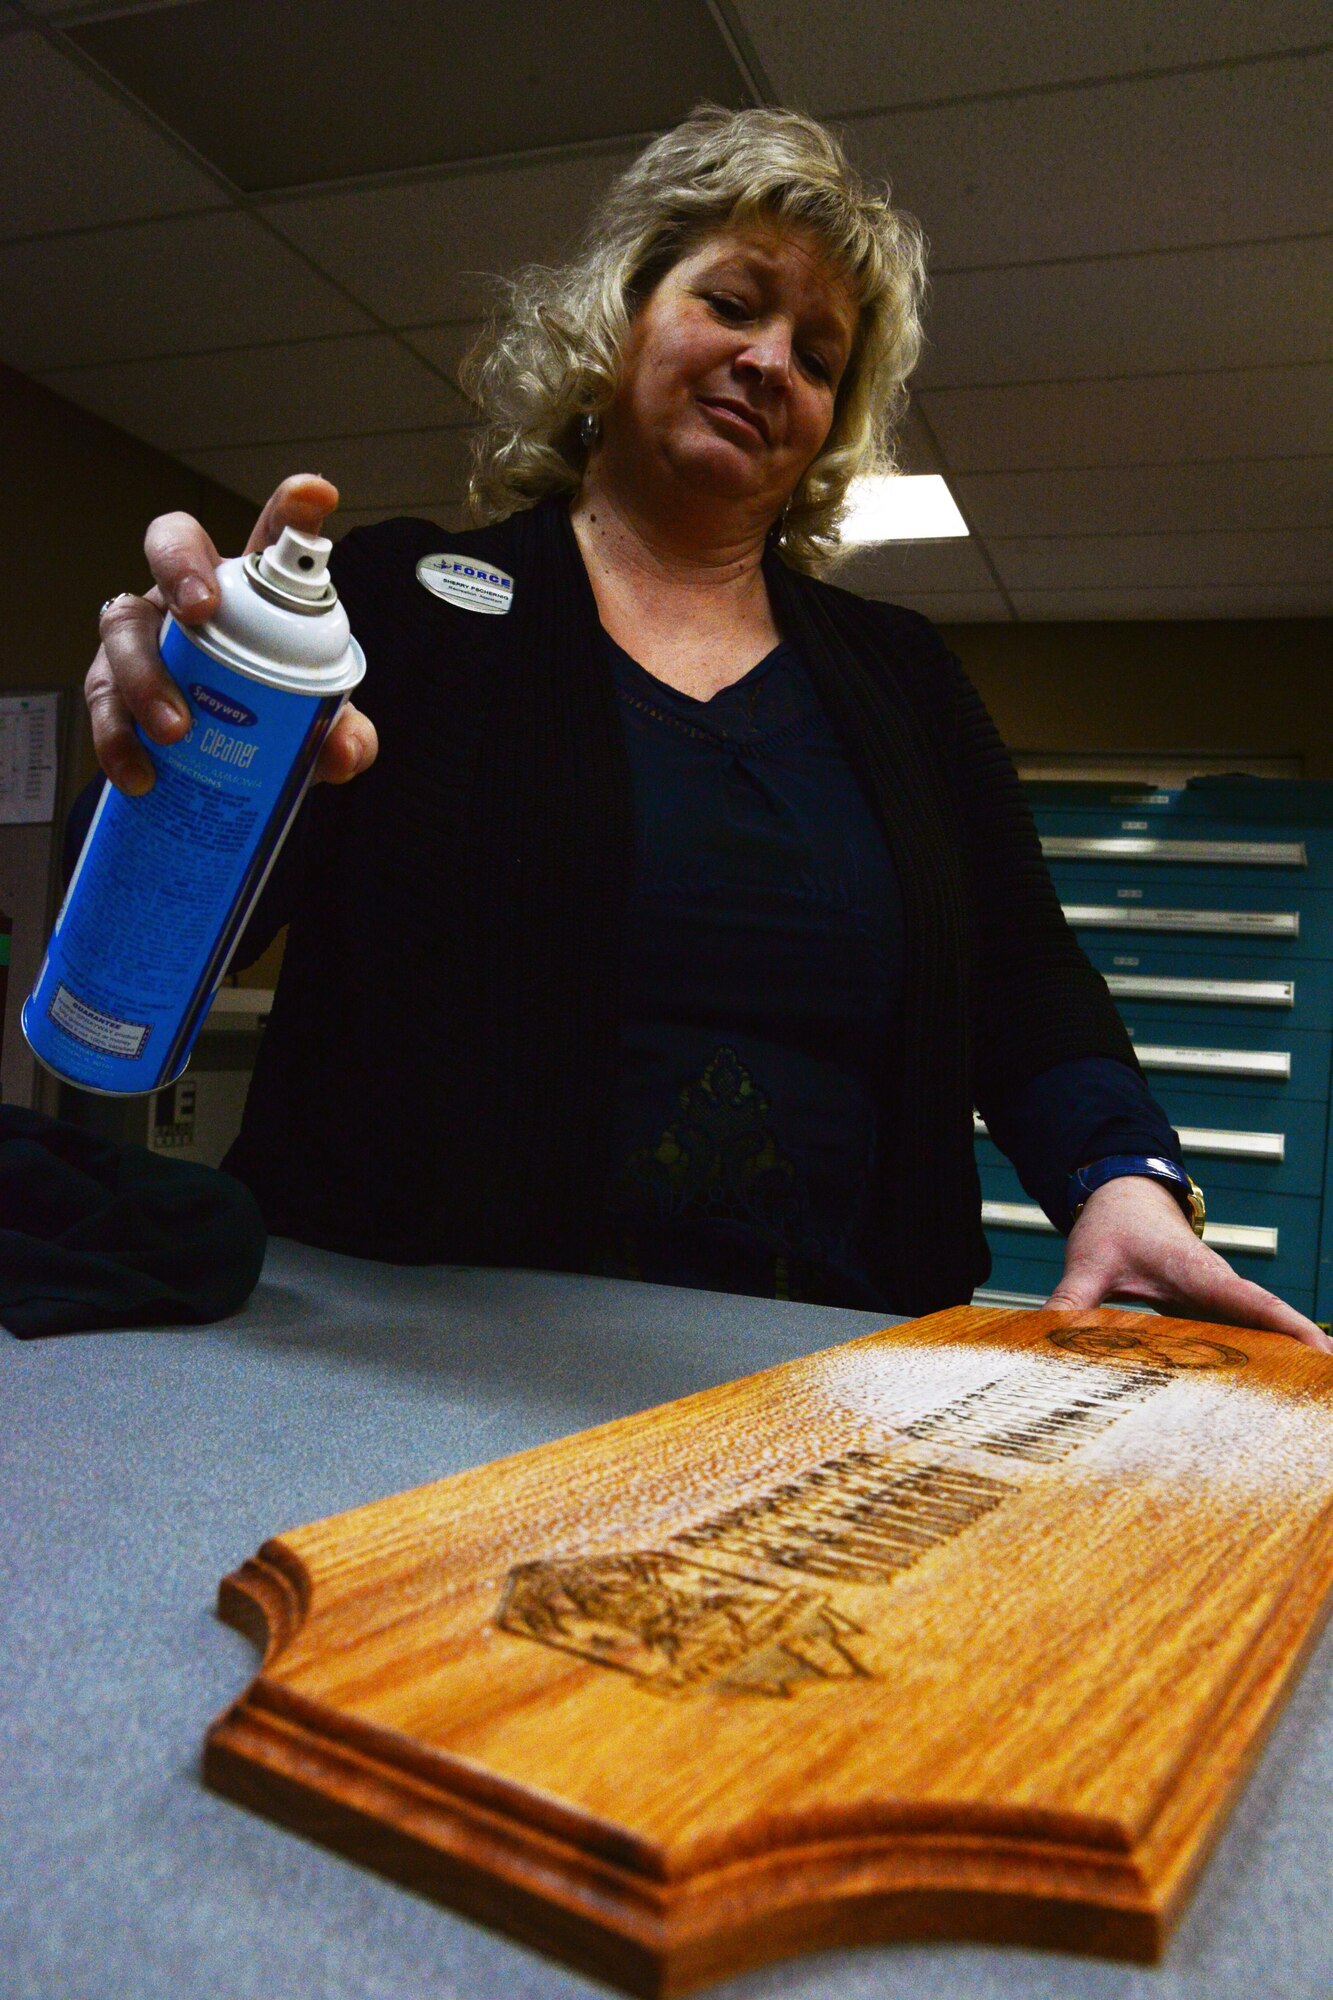 Sherry Pschernig, 341st Force Support Squadron Arts and Crafts Center engraver, sprays a wooden plaque Dec. 7, 2016, at Malmstrom Air Force Base, Mont. The Engraving Shop has the capability to make wooden plaques from scratch, which then have to be polished and treated for longevity to ensure the best quality product possible for the customer. (U.S. Air Force photo/Airman 1st Class Magen M. Reeves)	